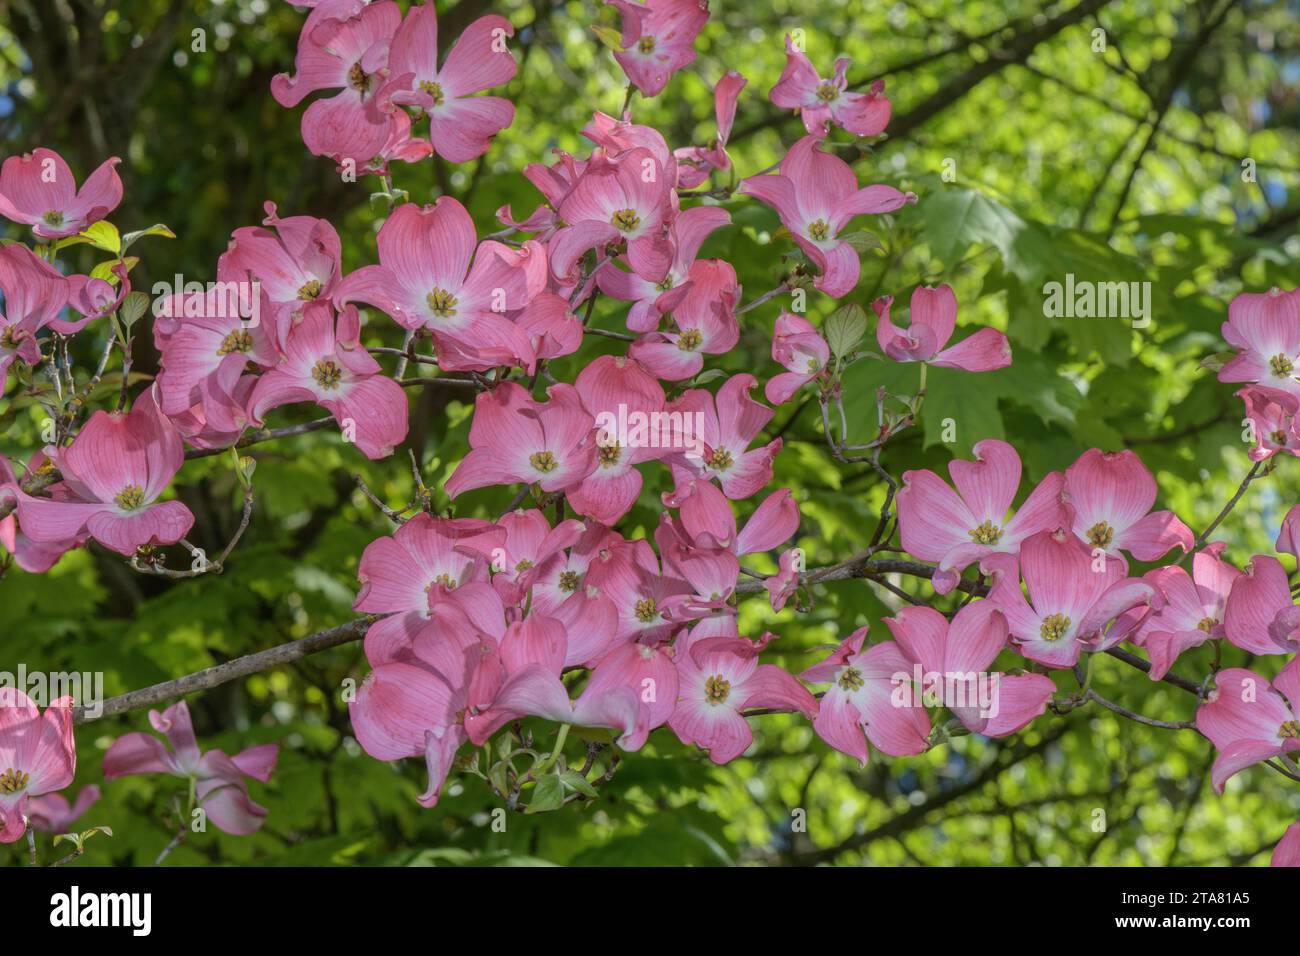 Pink form of Flowering dogwood, Cornus florida, in cultivation. Stock Photo